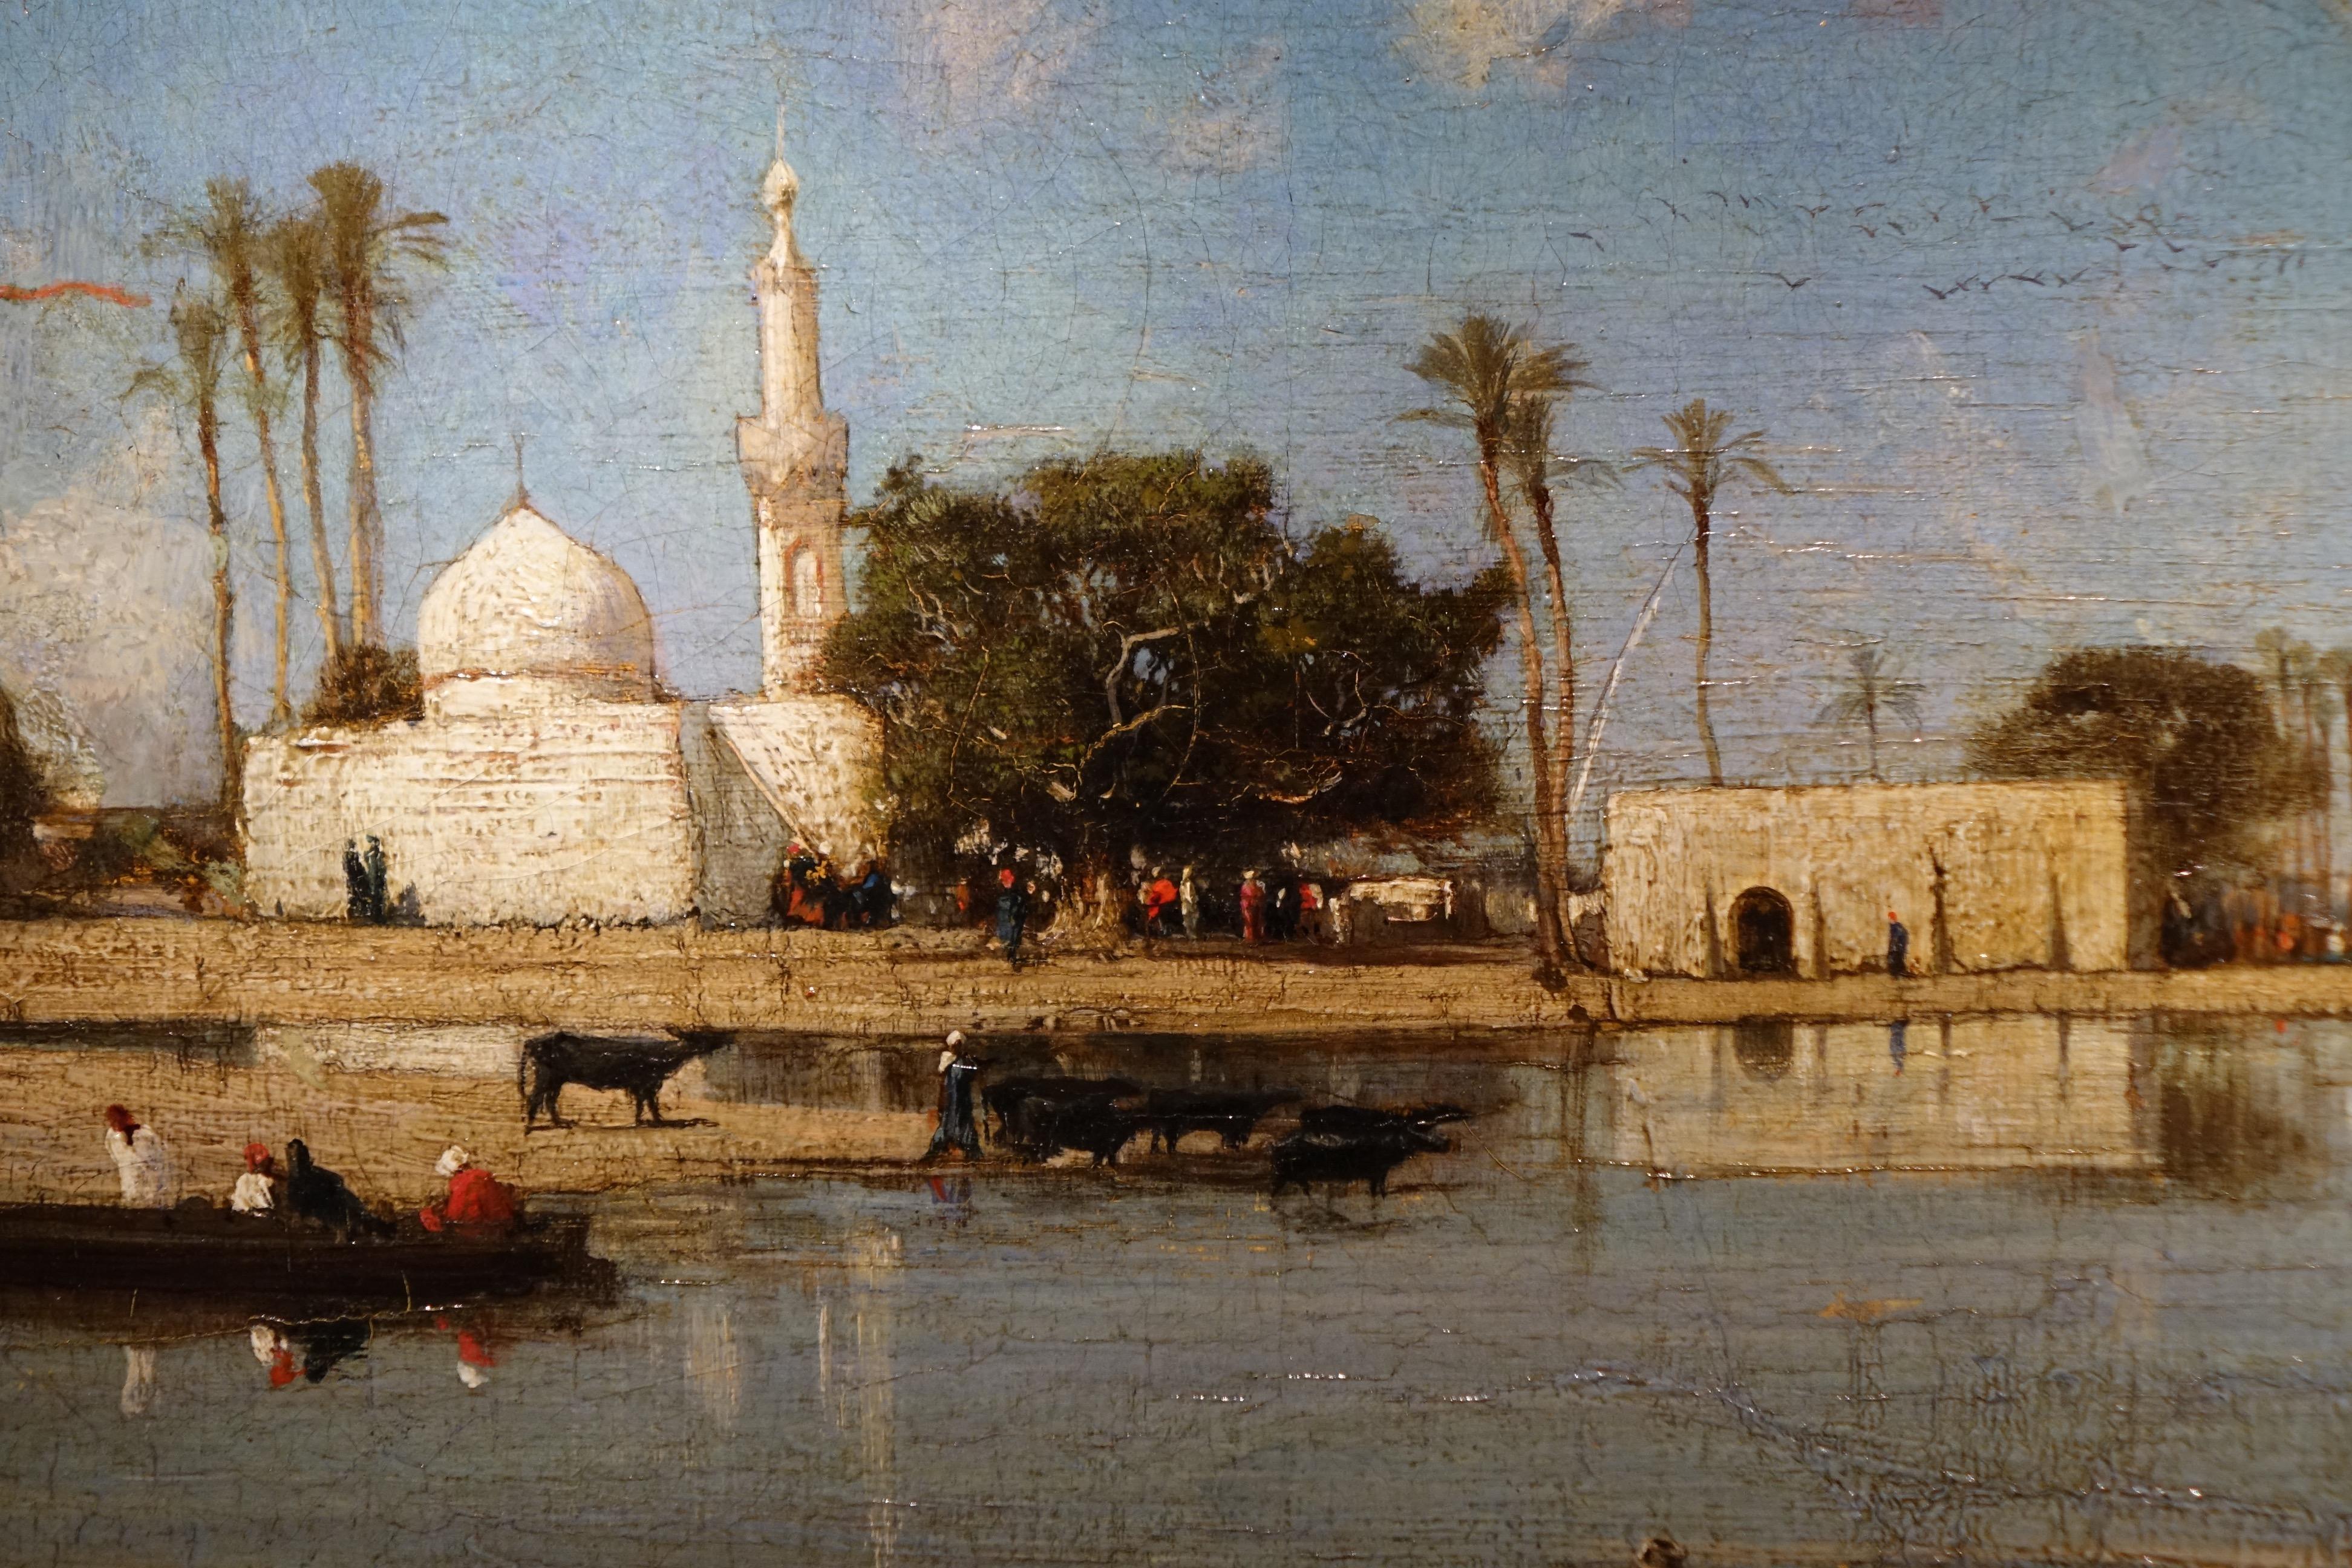 Banks of the Nile, painting signed Victor Hughet (1835-1902) 
Oil on canvas depicting the banks of the Nile, which is certified by a label on the back, with a number 368.
The location is unknown, but we see three groups of people, two of which